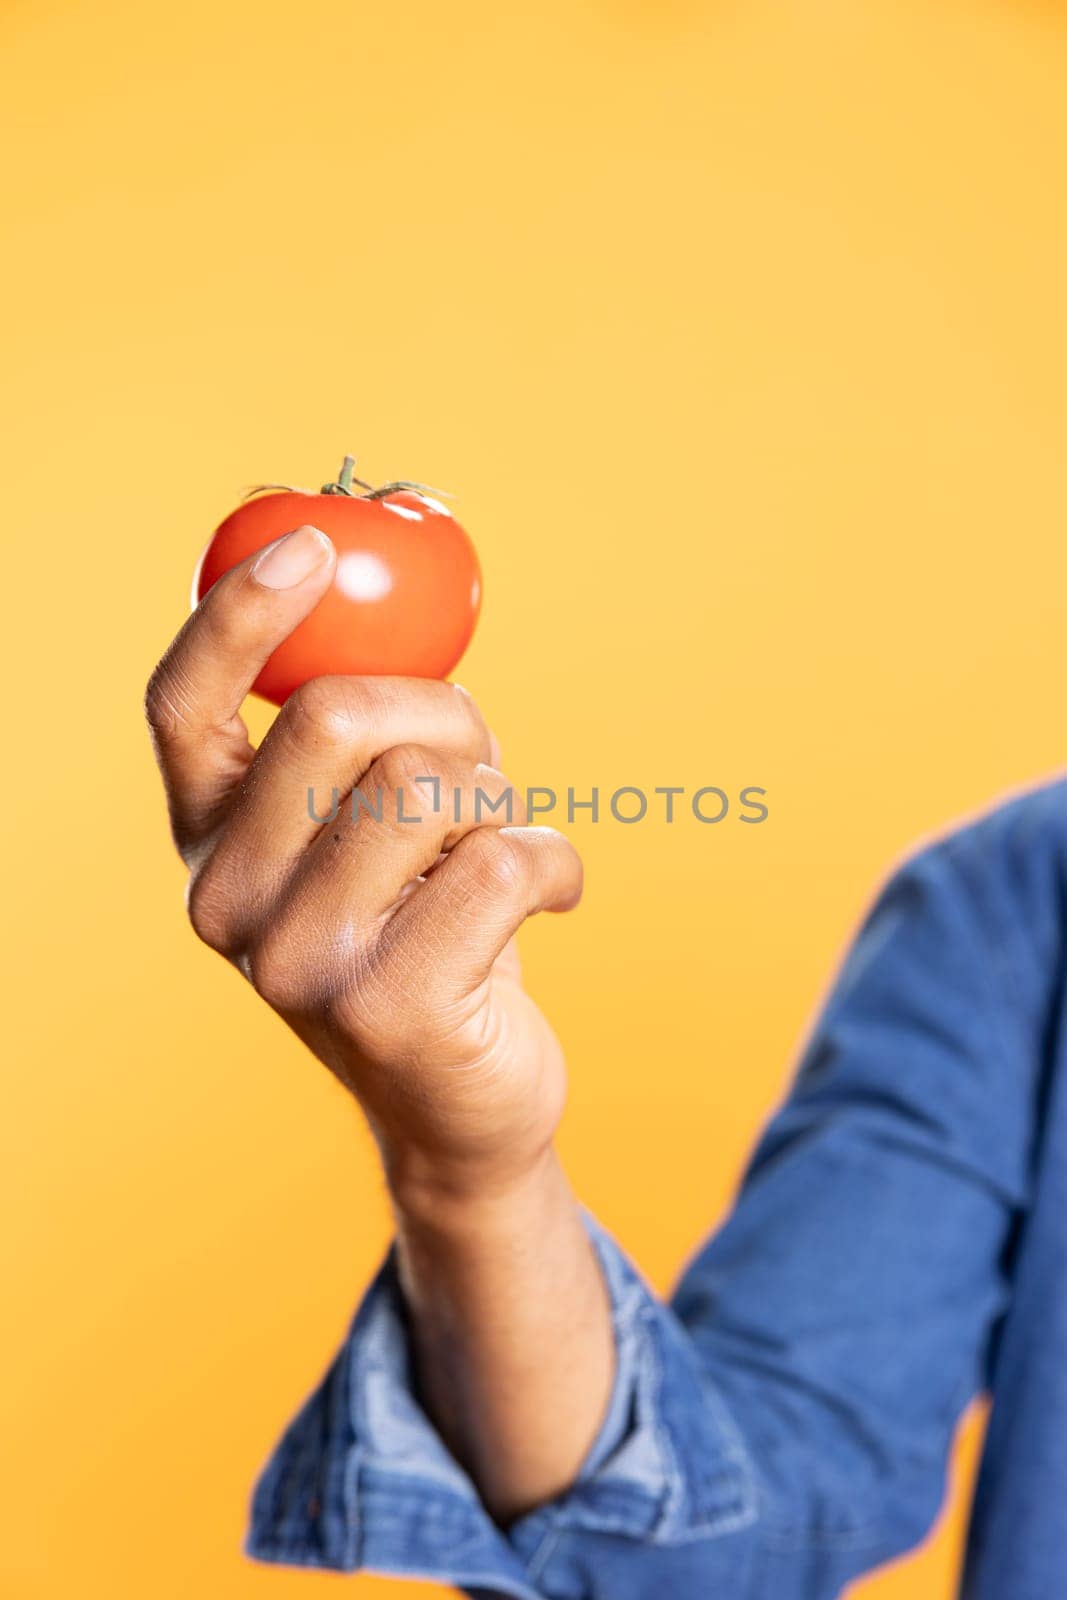 African american guy shows a natural ripe tomato in front of the camera, presenting an ethically sourced veggie from the local farmers market. Man admires bio fresh produce. Close up.